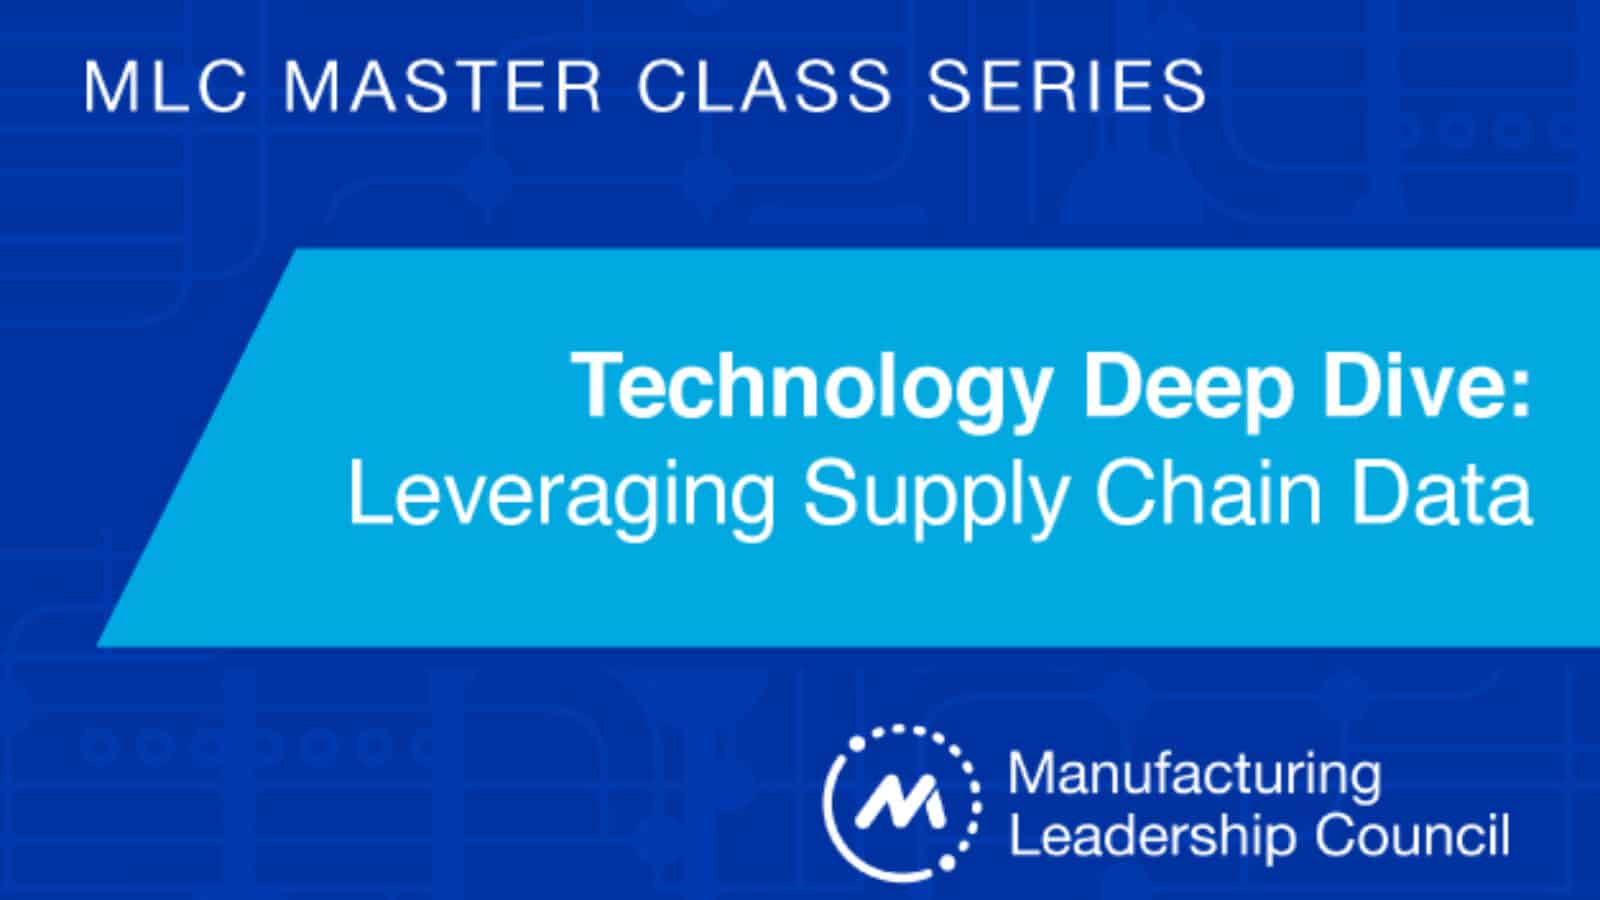 Technology Deep Dive | Leveraging Supply Chain Data